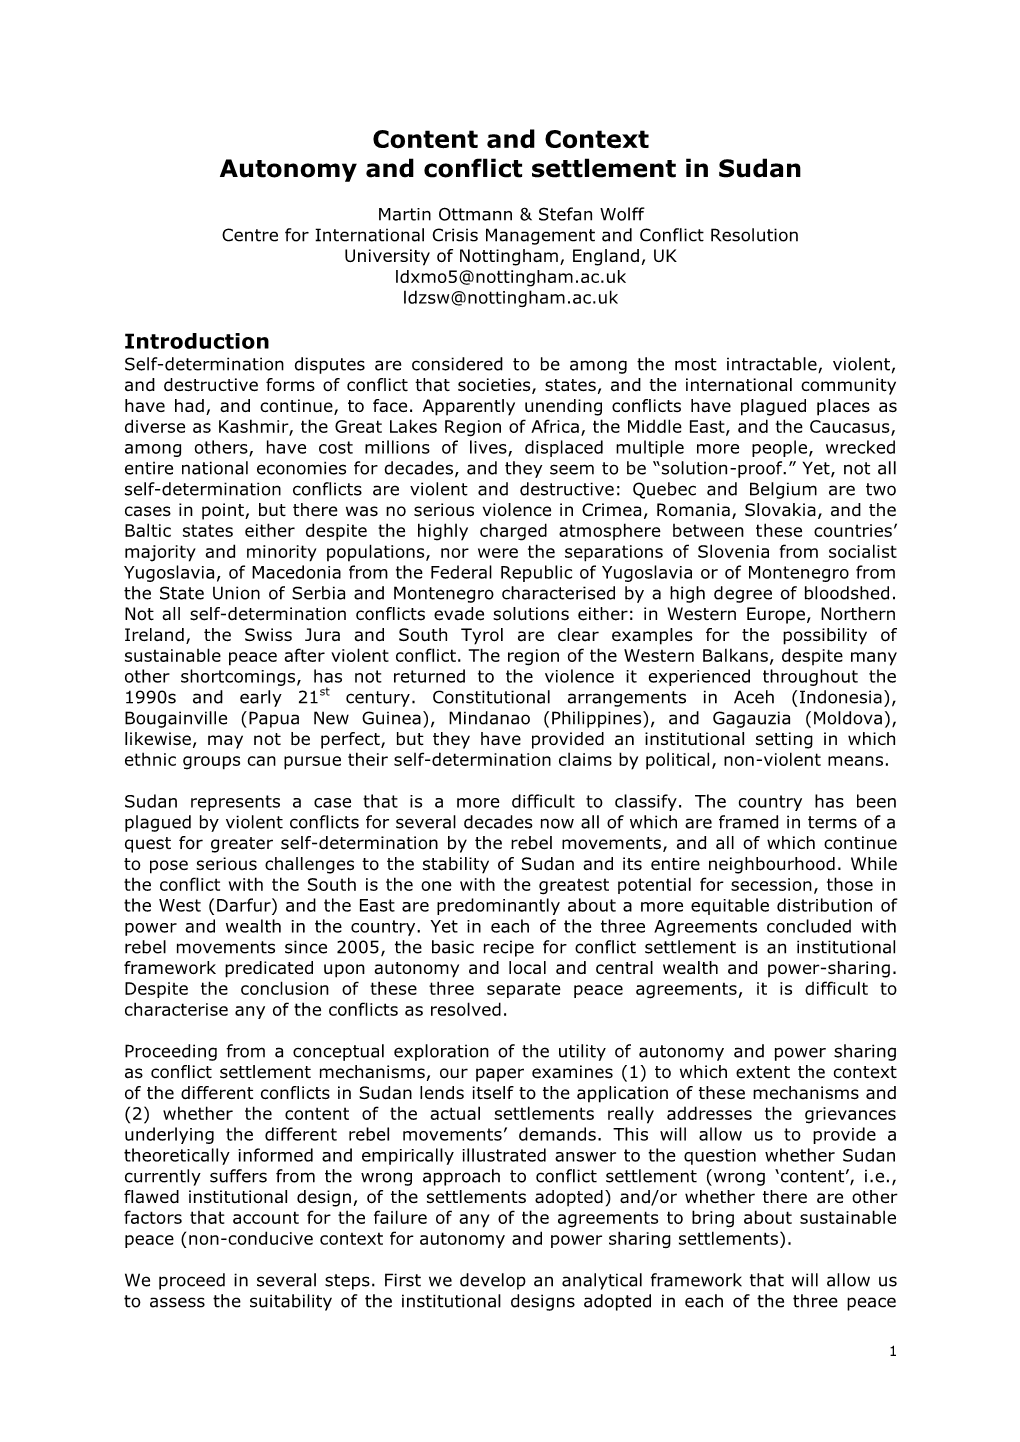 Content and Context Autonomy and Conflict Settlement in Sudan